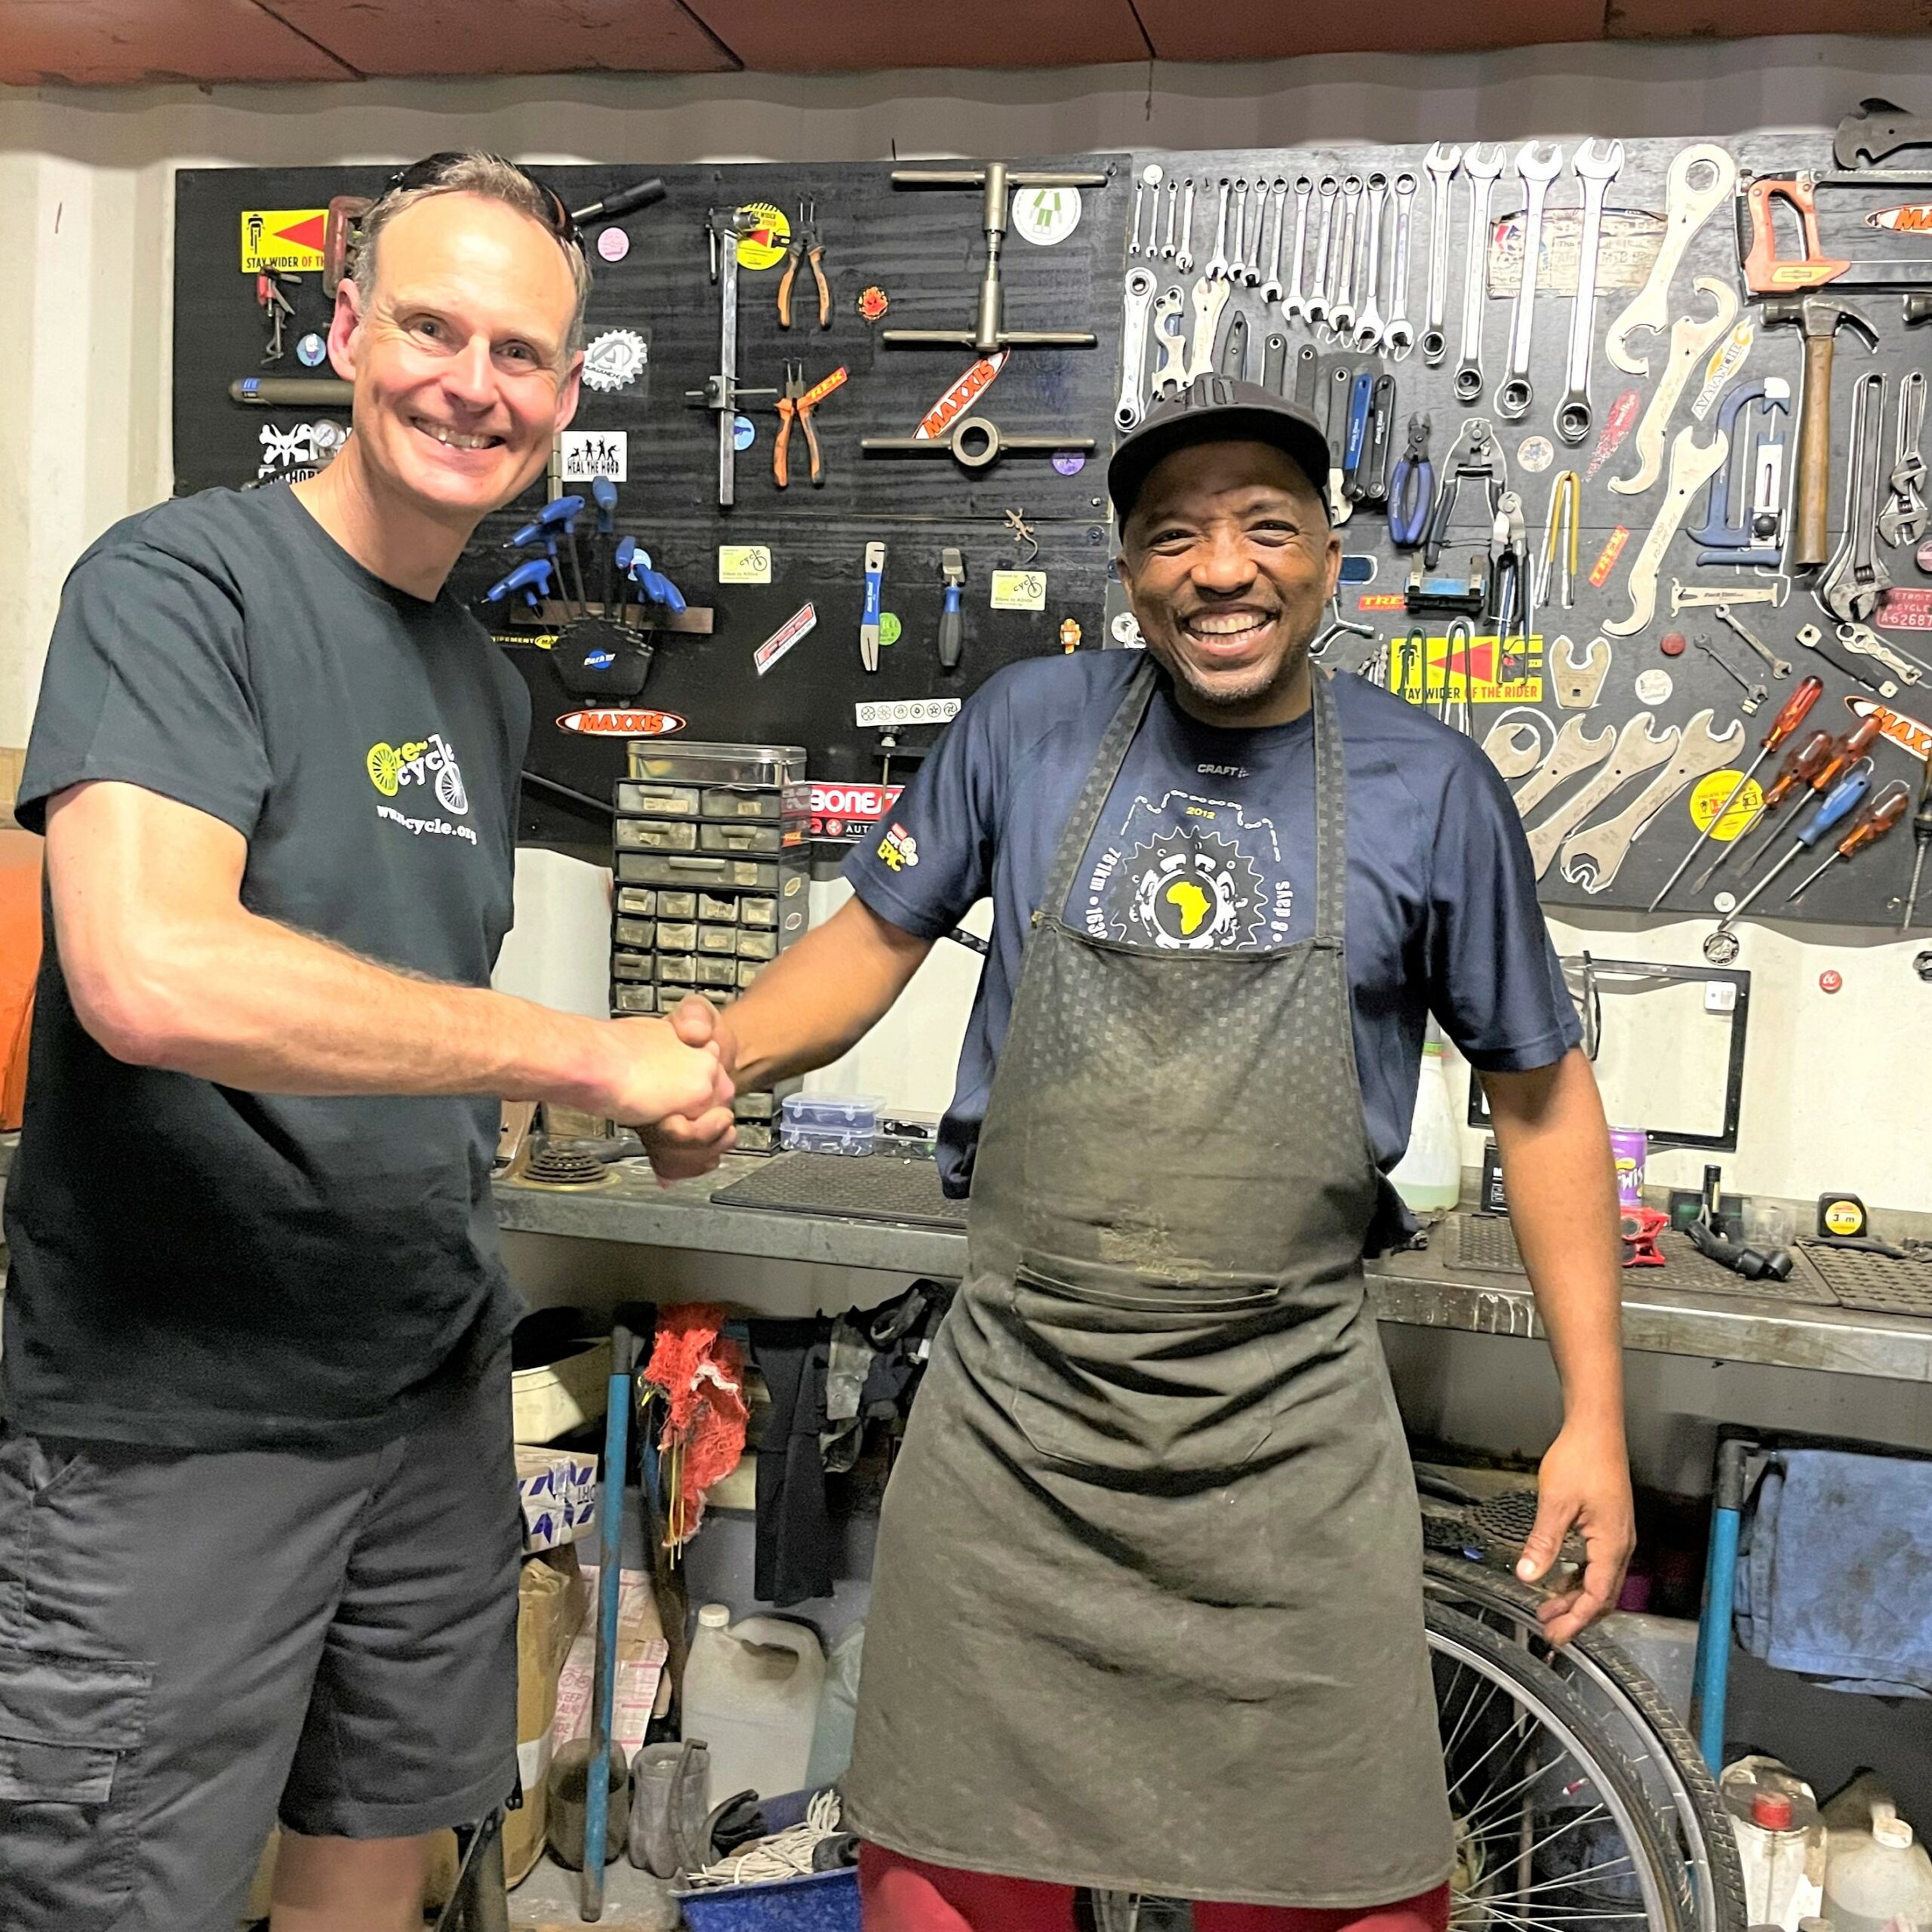 South Africa Partnership
Re-Cycle Bikes To Africa
Bicycle Mechanic
Africa Partner